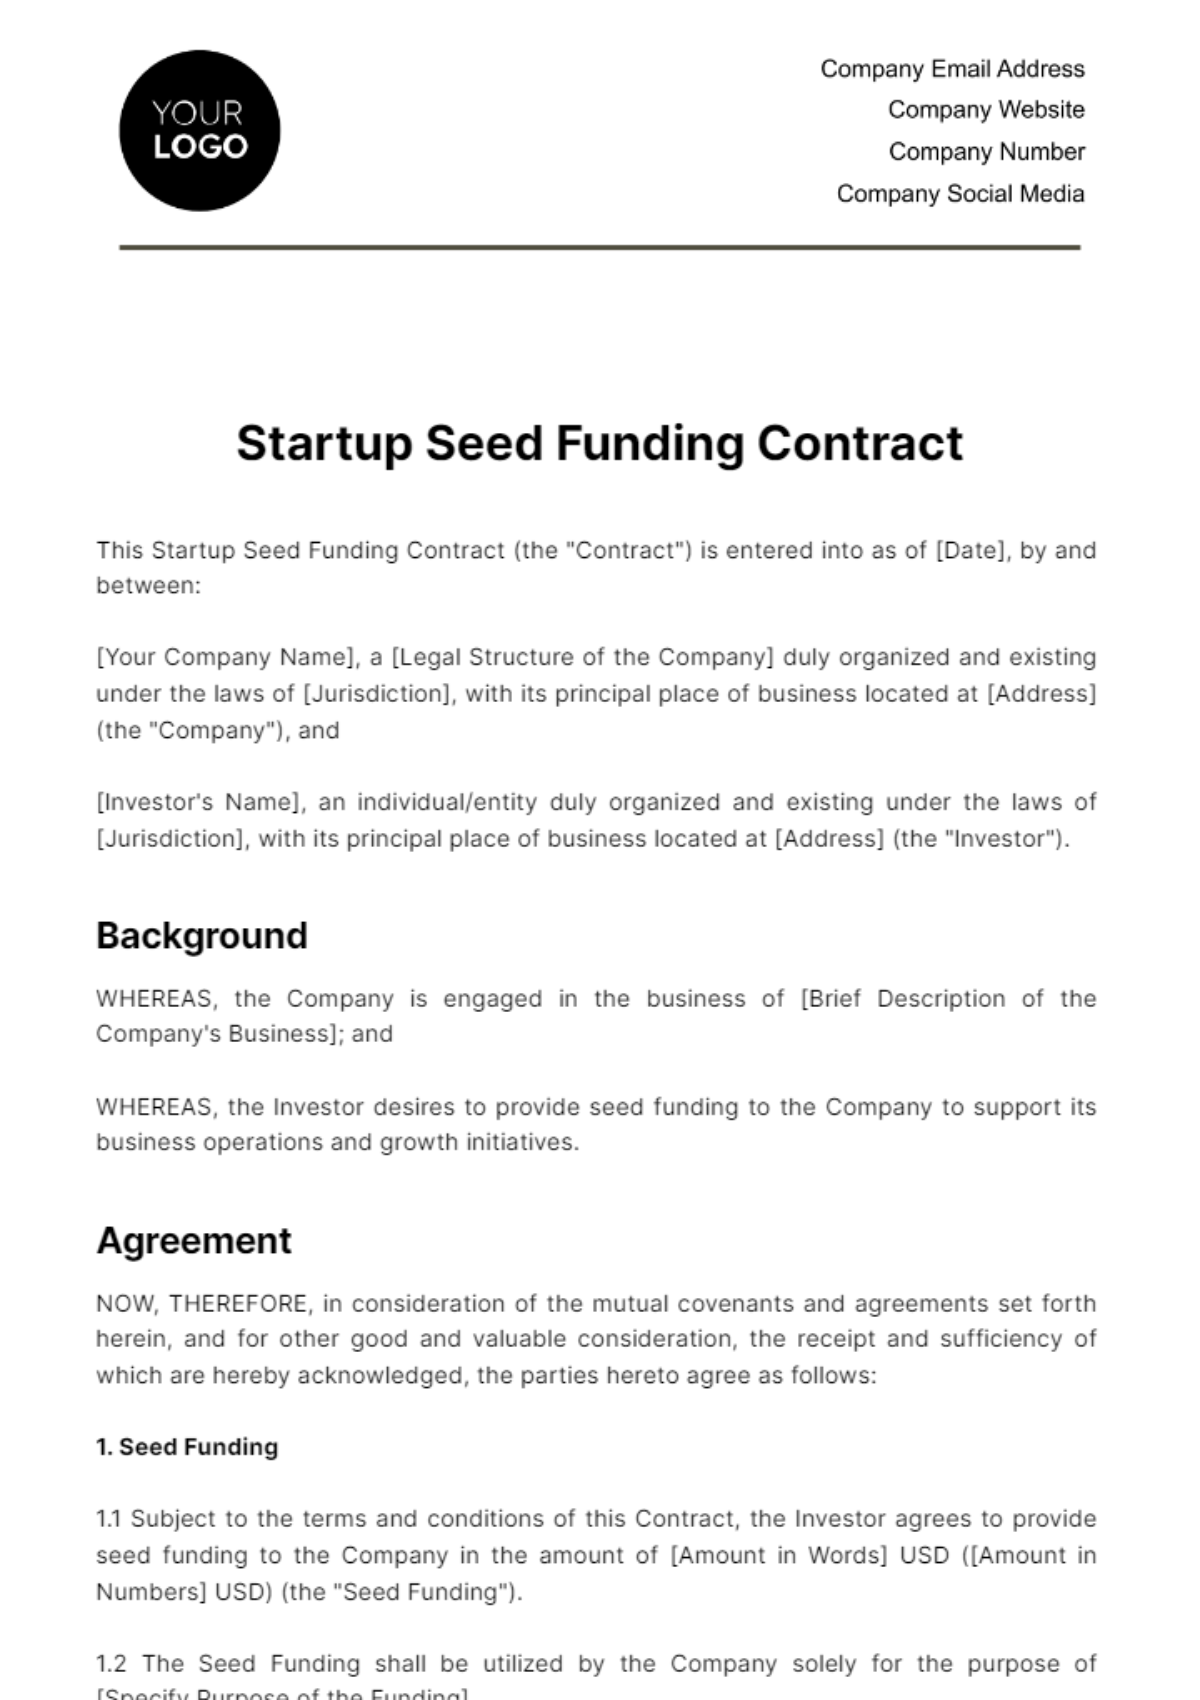 Startup Seed Funding Contract Template